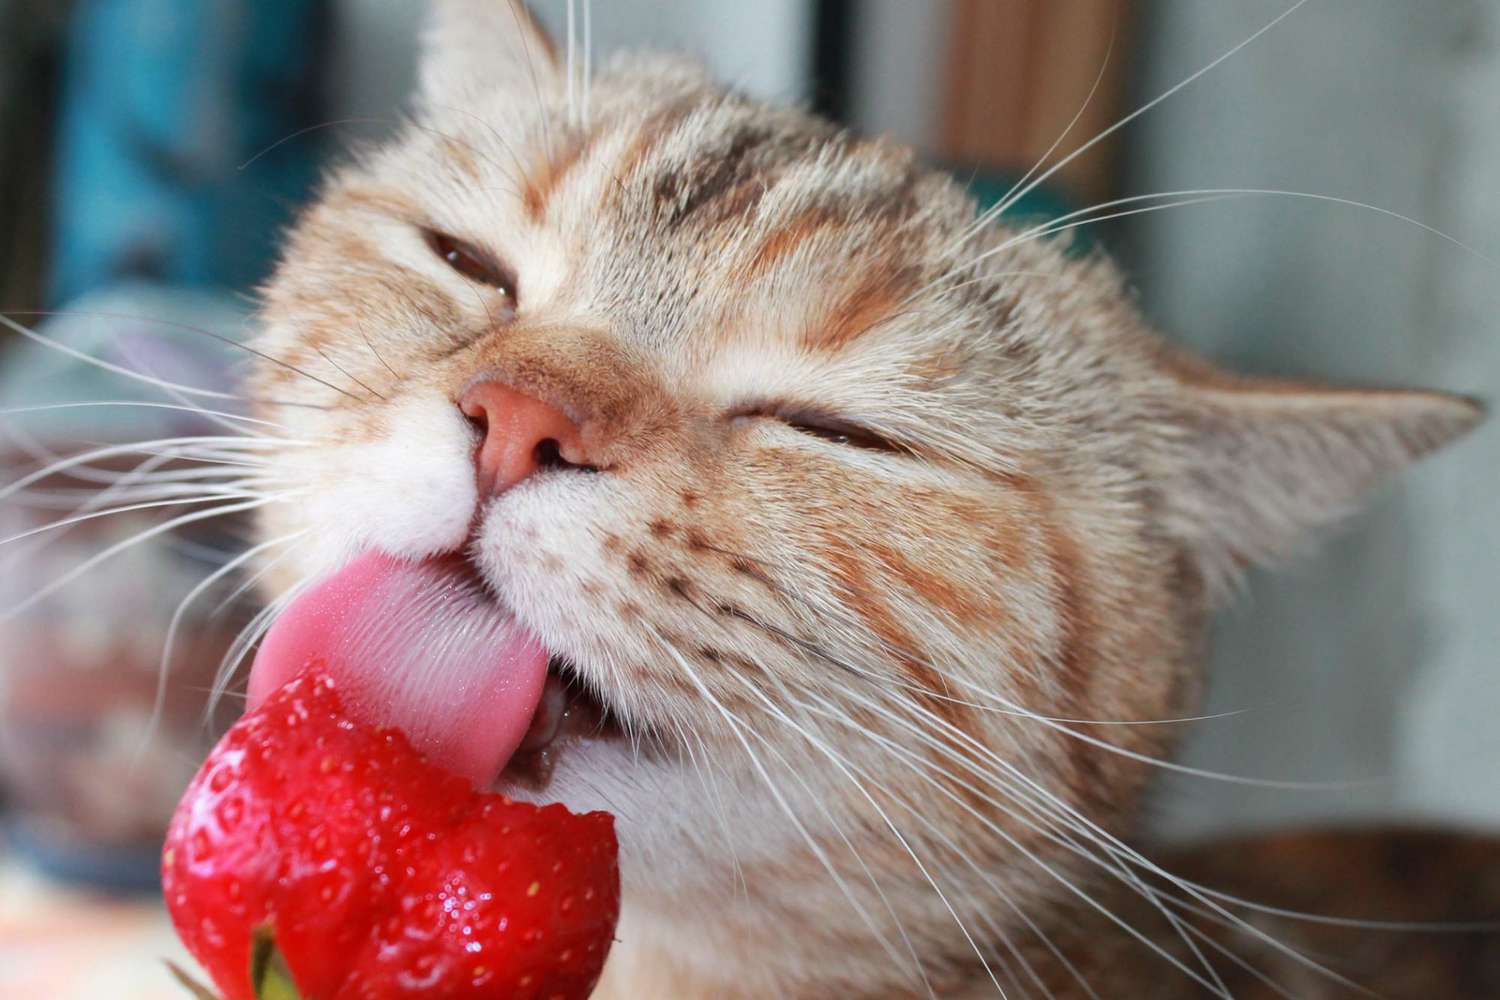 What Can Cats Eat? 9 Human Foods That Are Safe for Kitty to Snack On |  Daily Paws